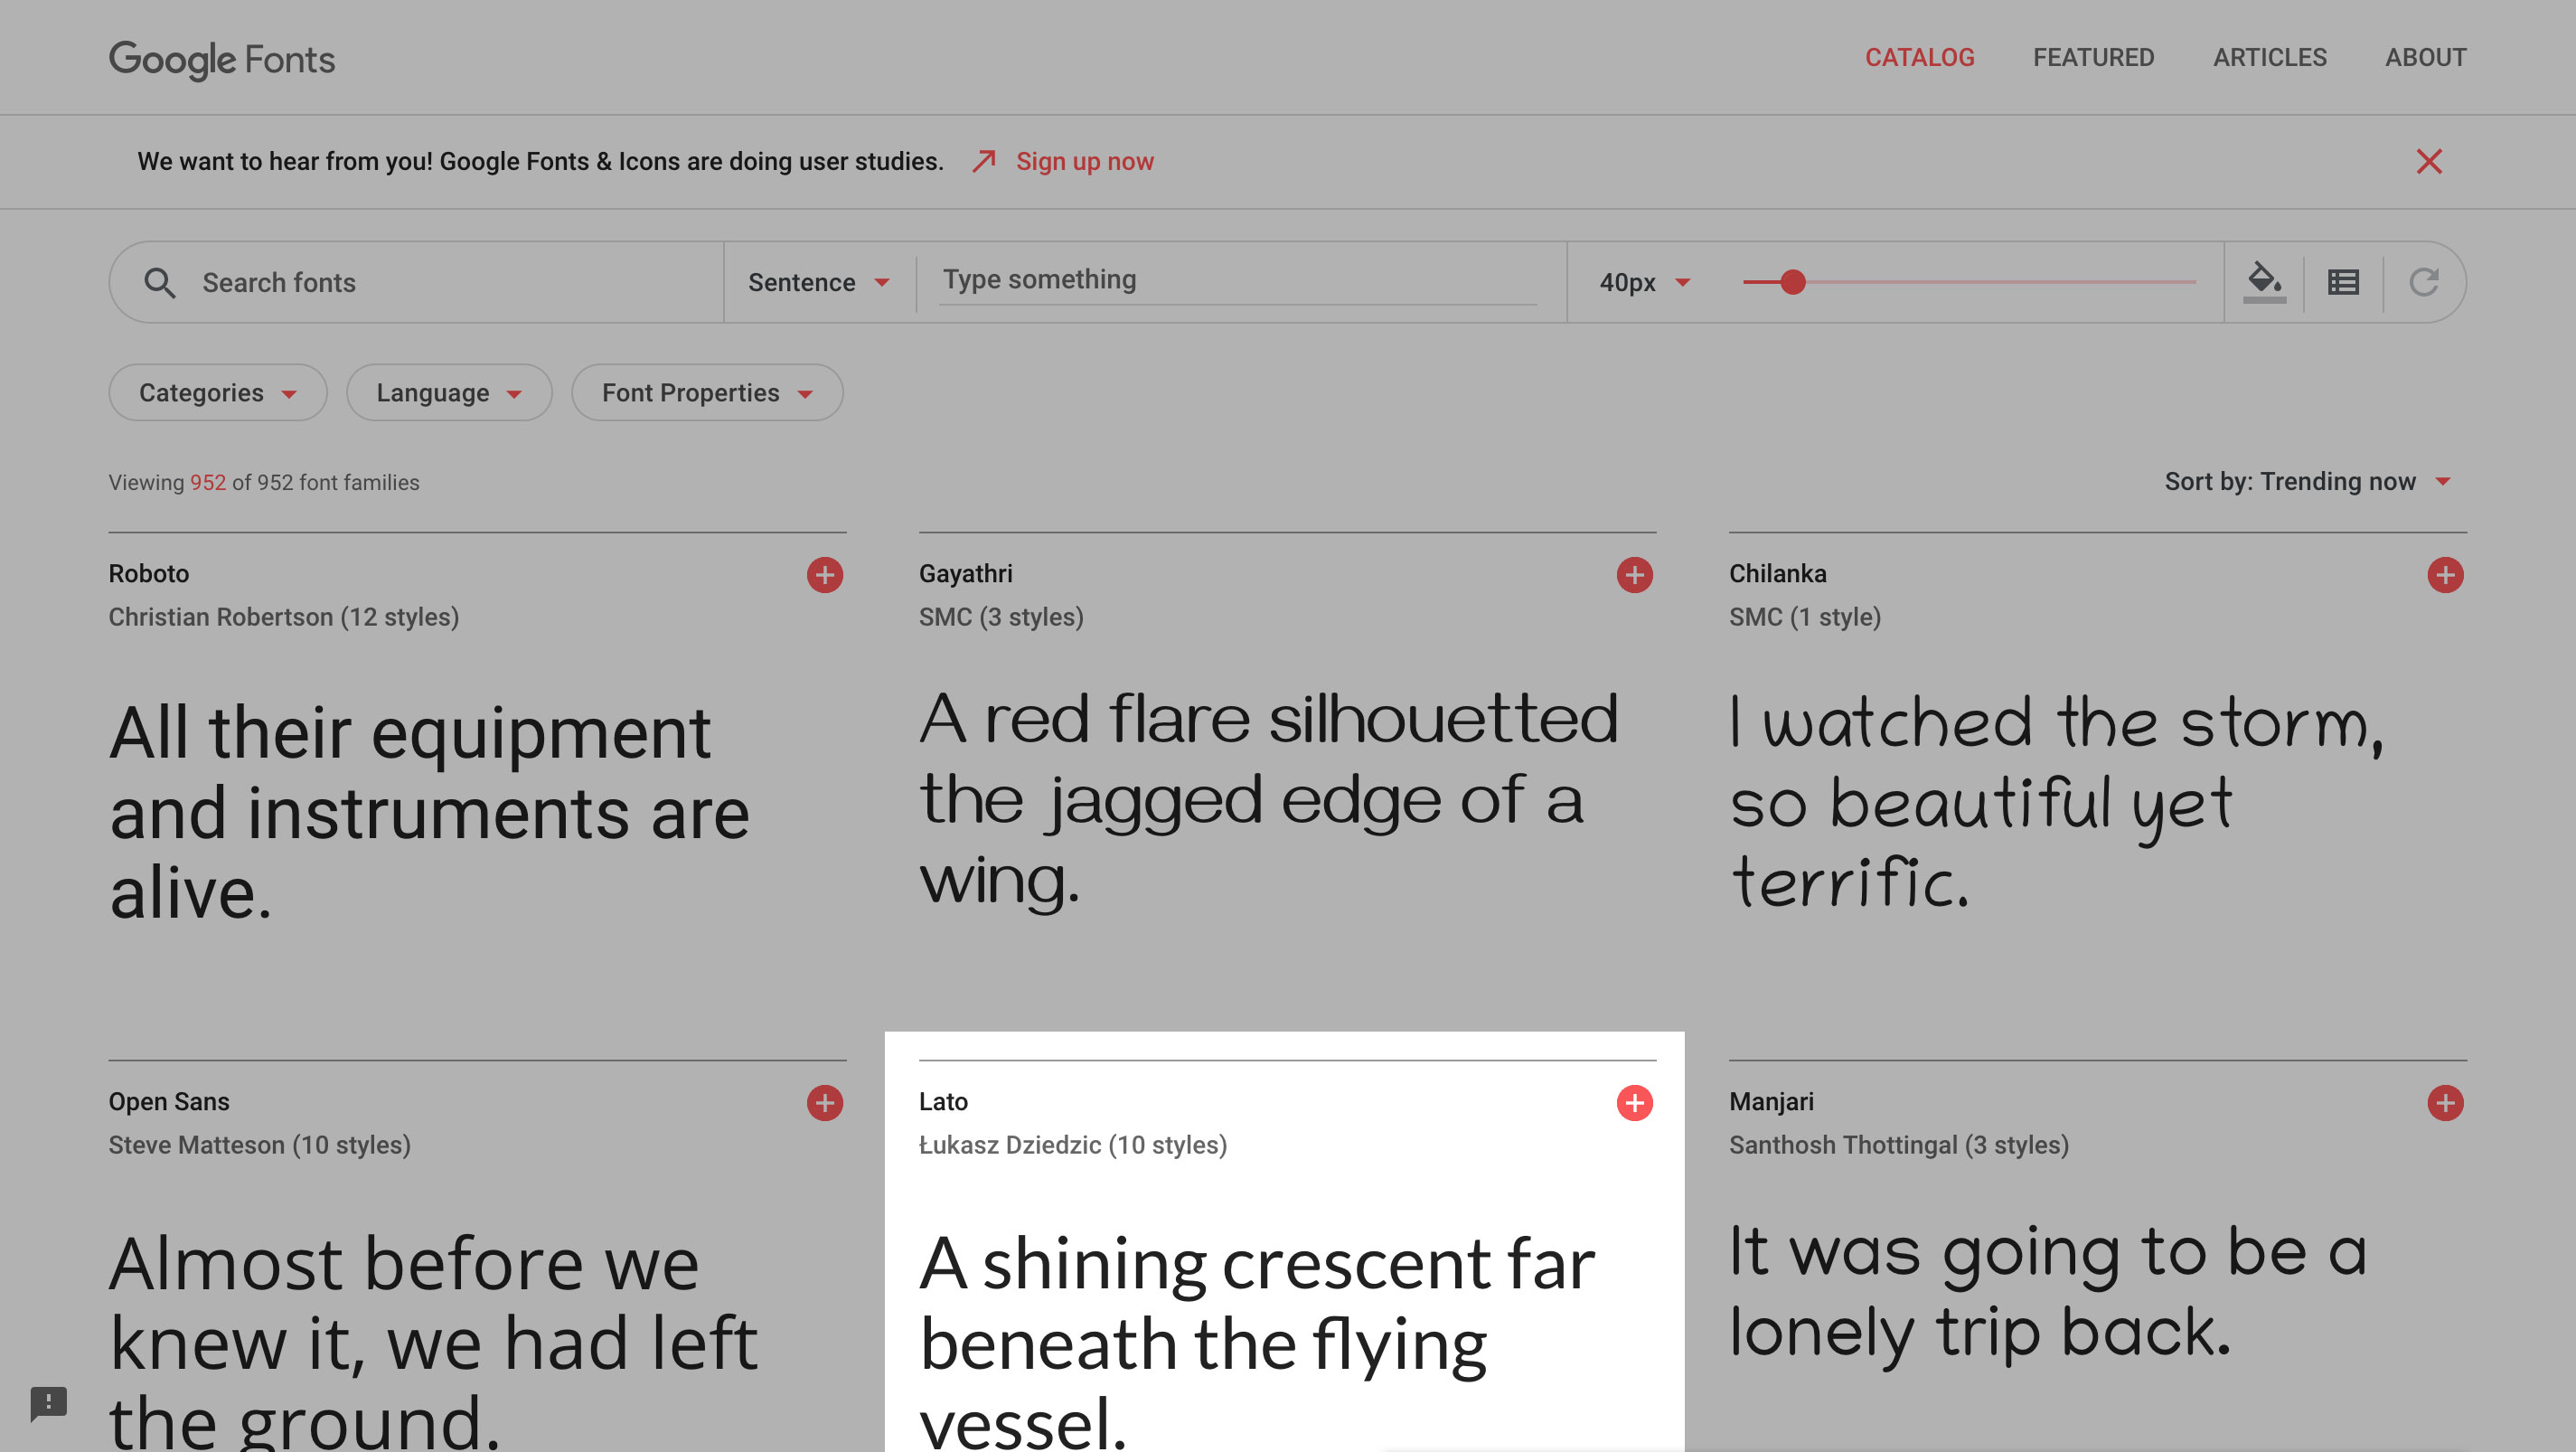 Google Fonts main page with "Lato" font family highlighted